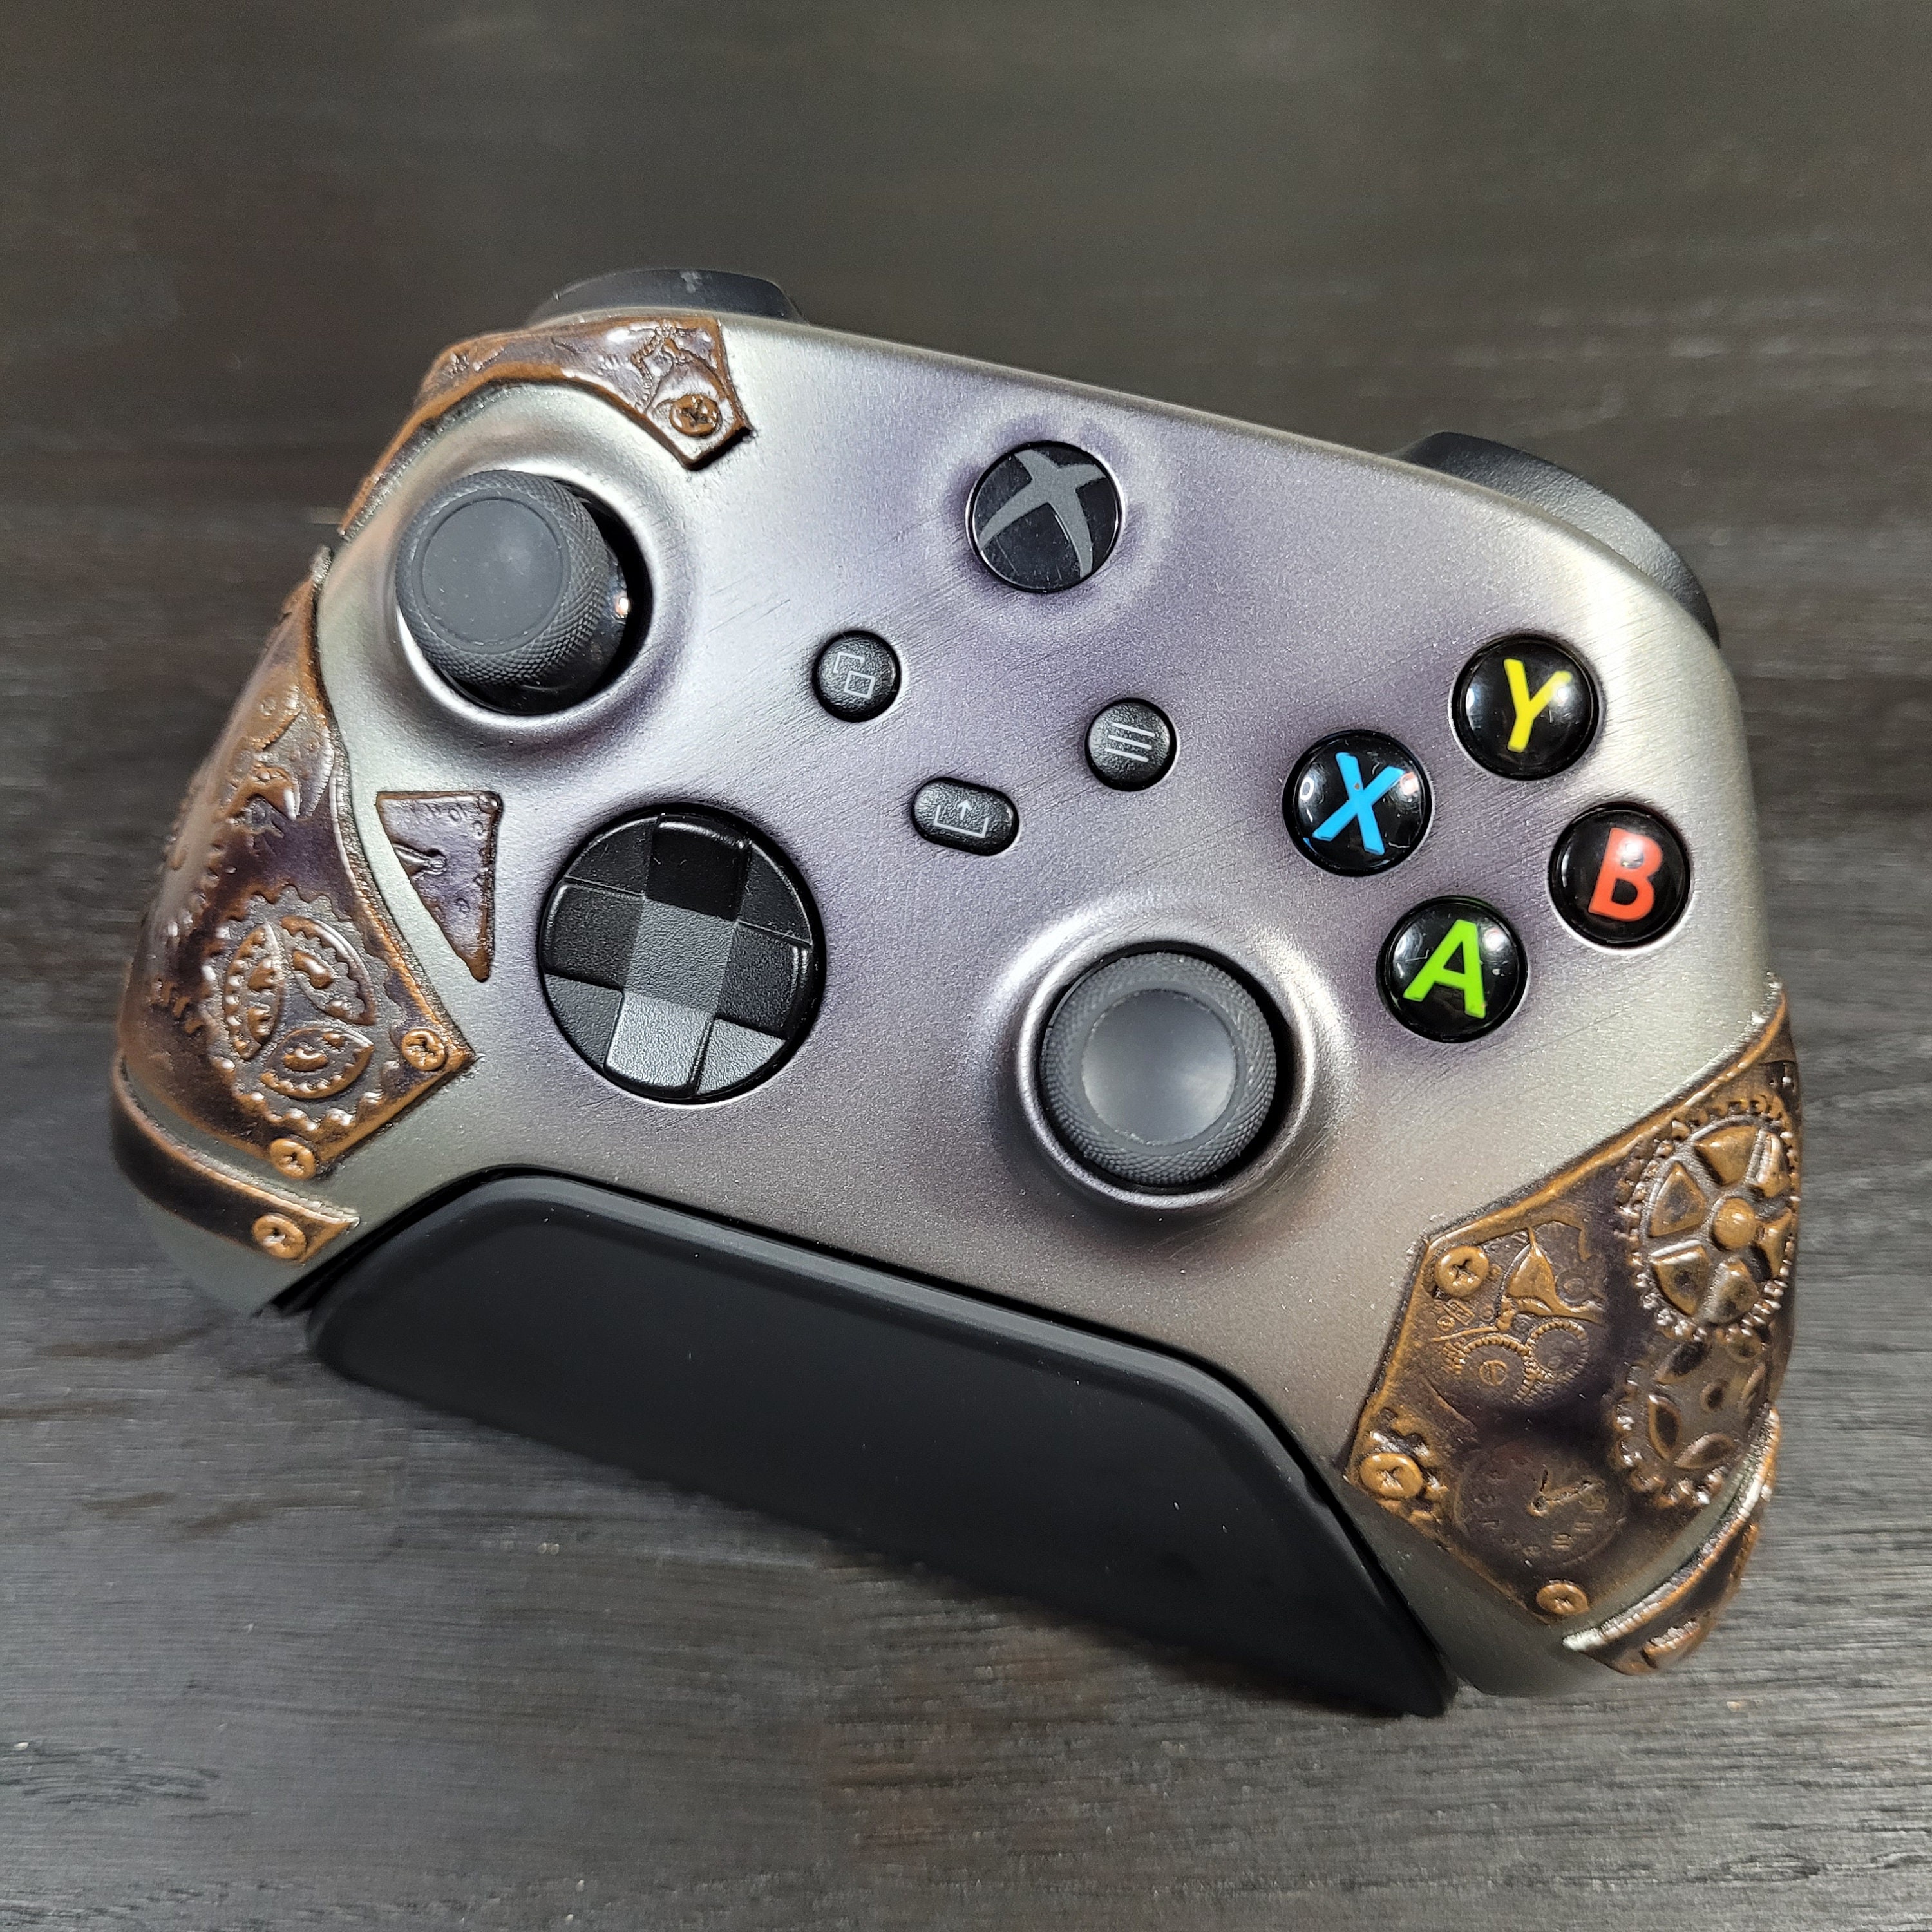 Ripstone Giving Away Ironcast-themed Steampunk Controllers 